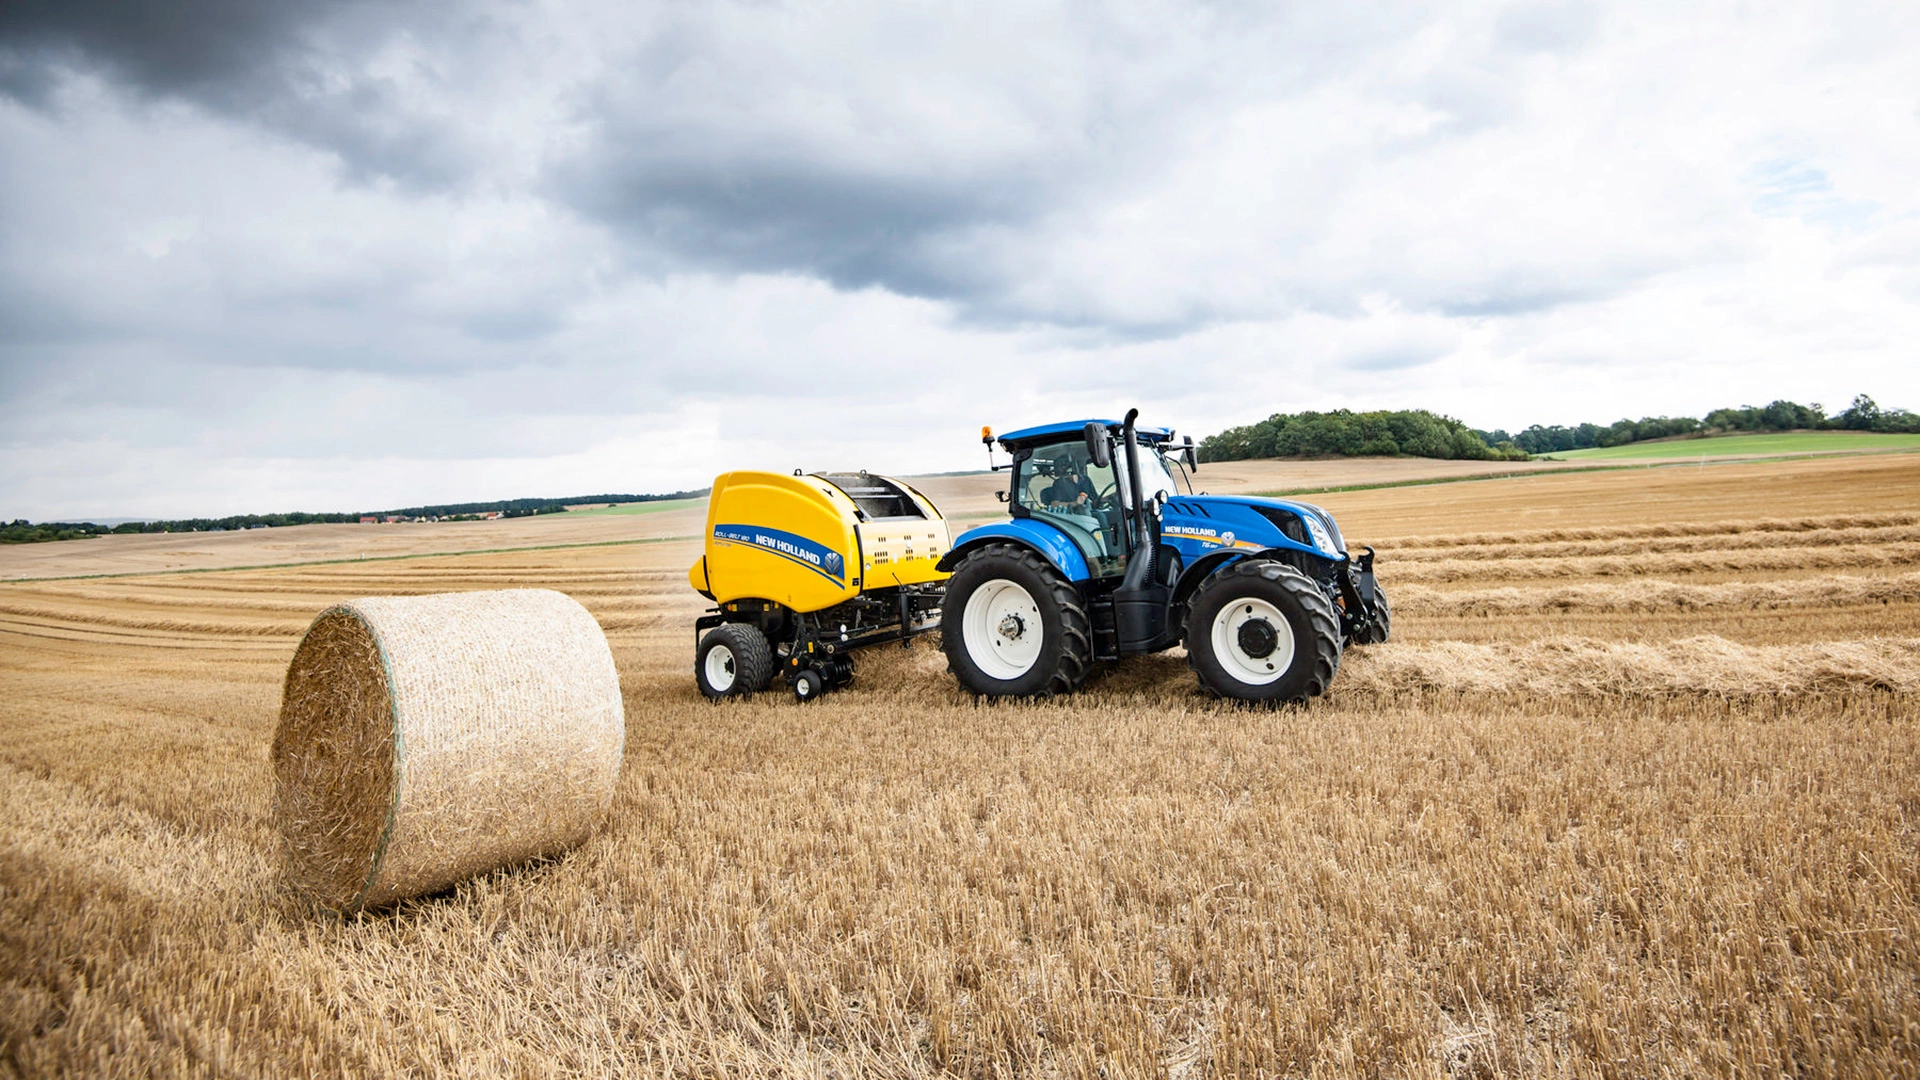 Tractor and Roll-Belt round baler combination actively bundling hay on the farmland